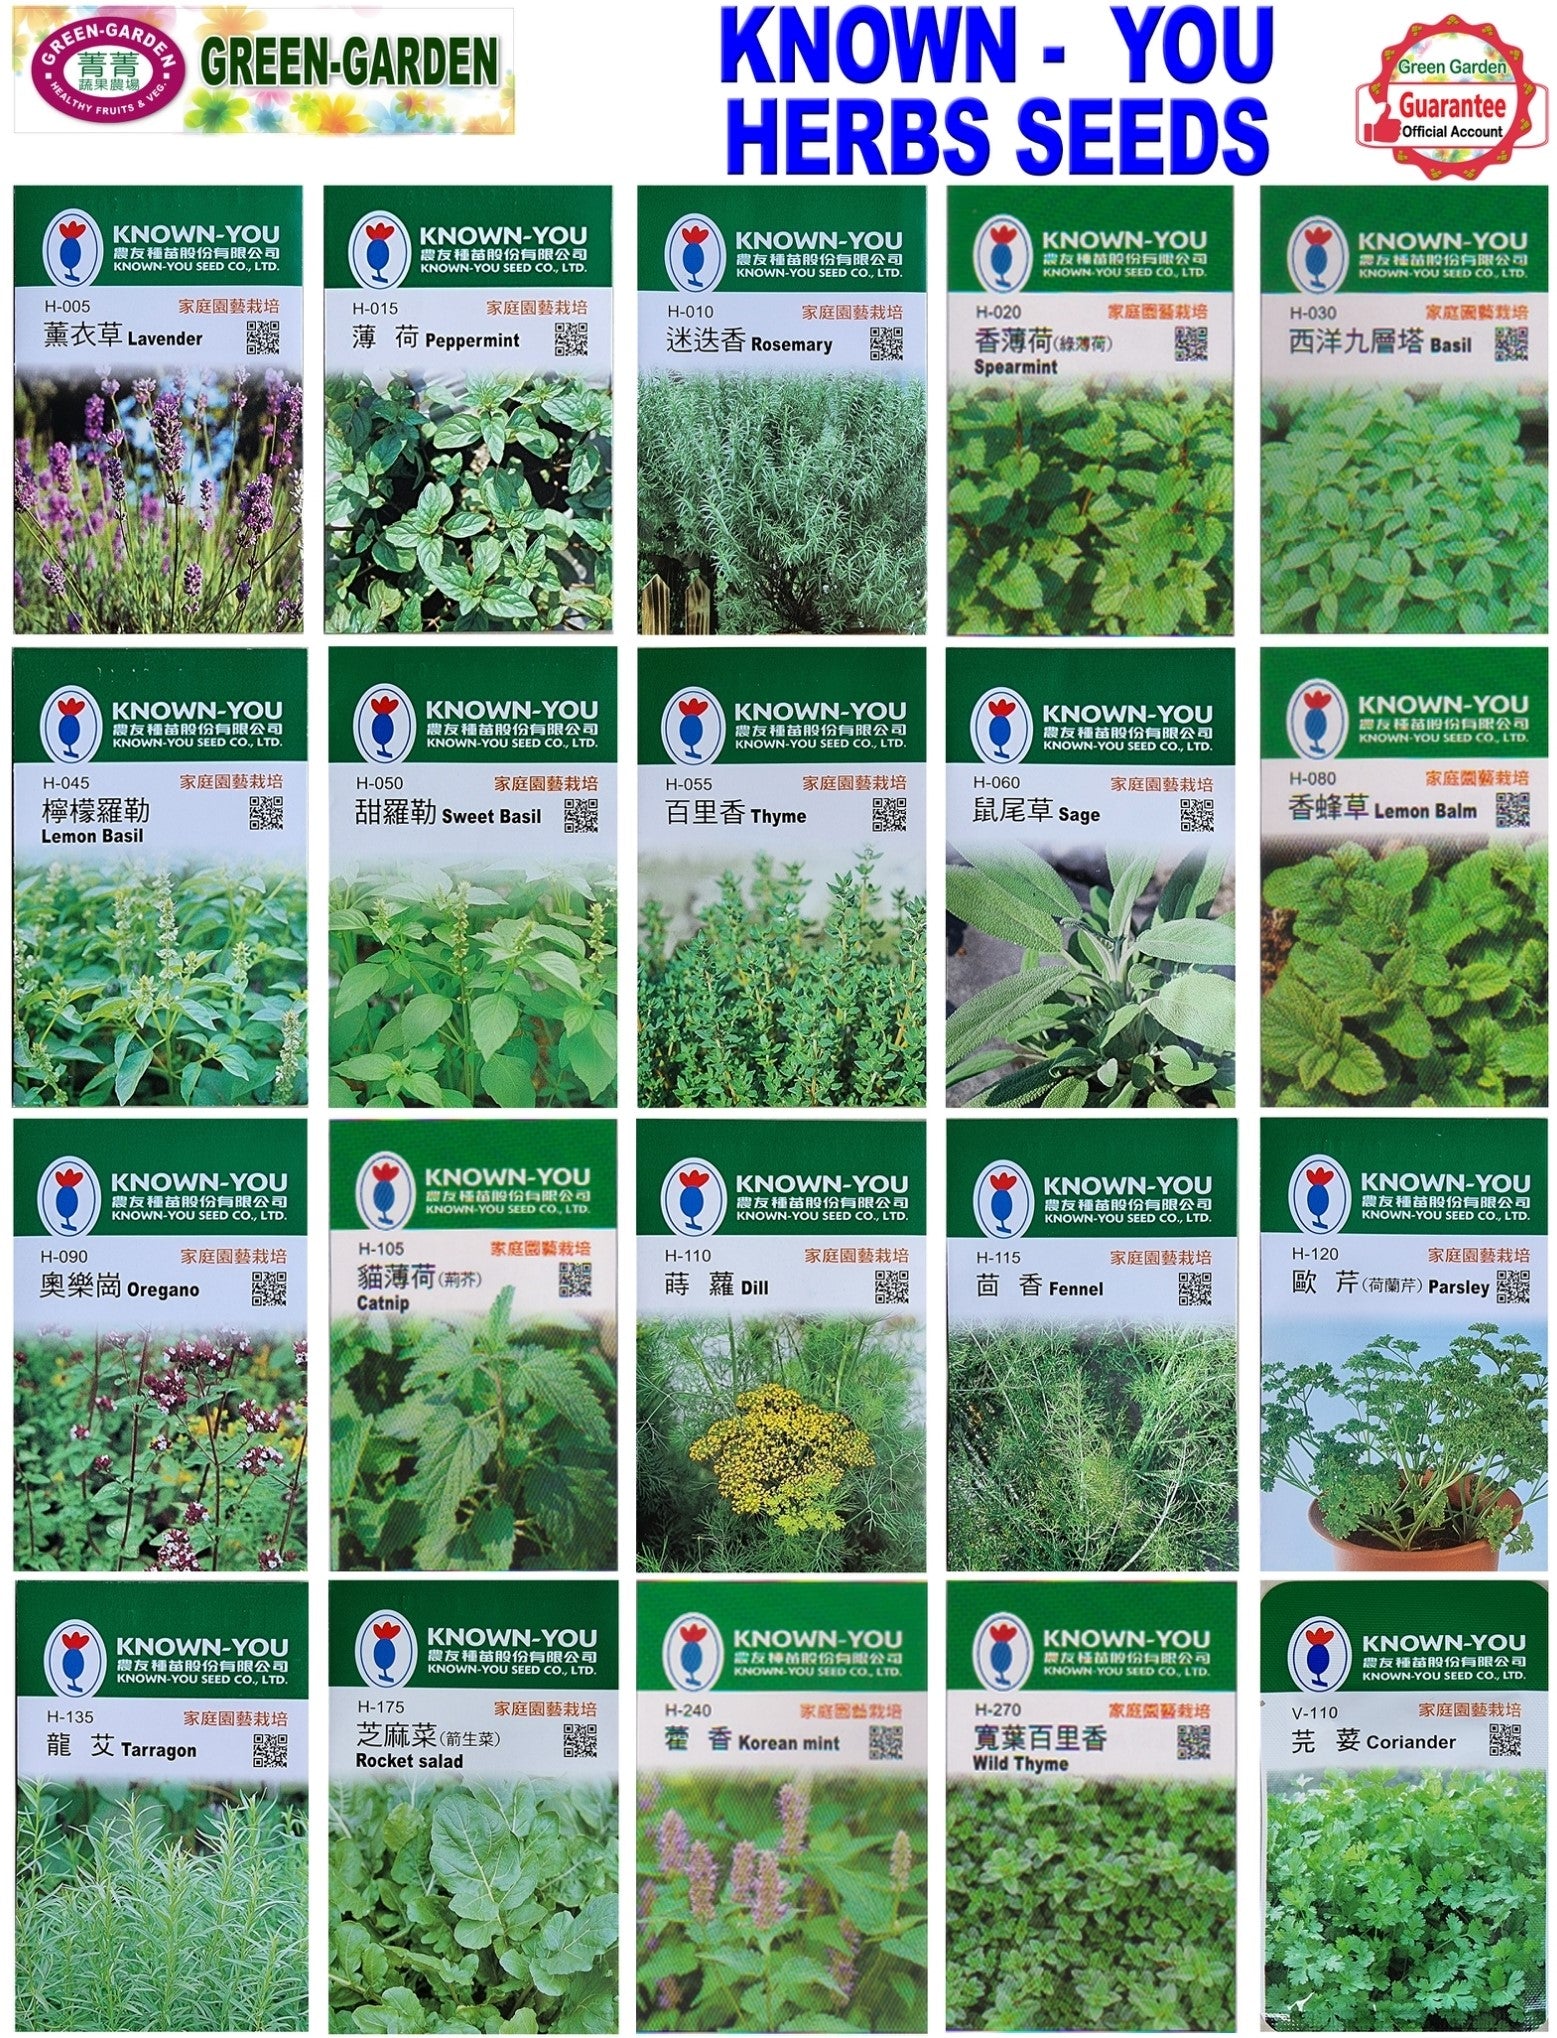 Known You Herbs Seeds (H-175 Rocket Salad)